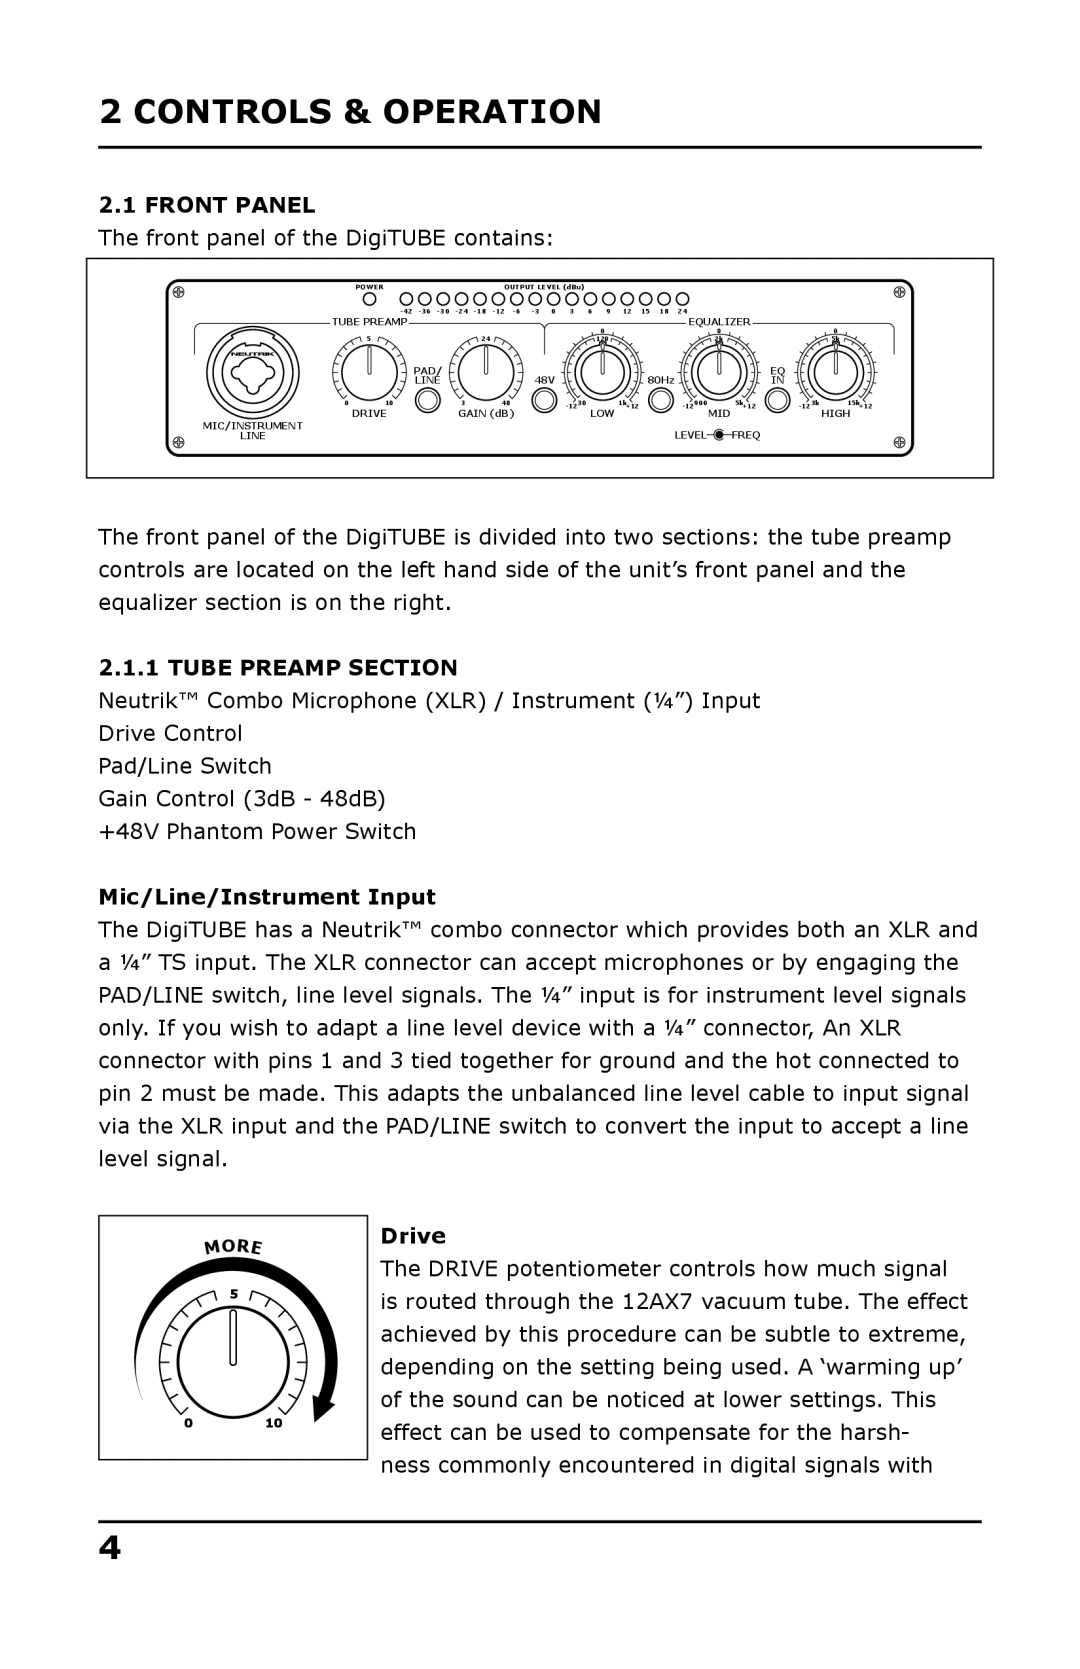 Presonus Audio electronic Single-Channel Tube user manual Controls & Operation, Front Panel, Tube Preamp Section, Drive 